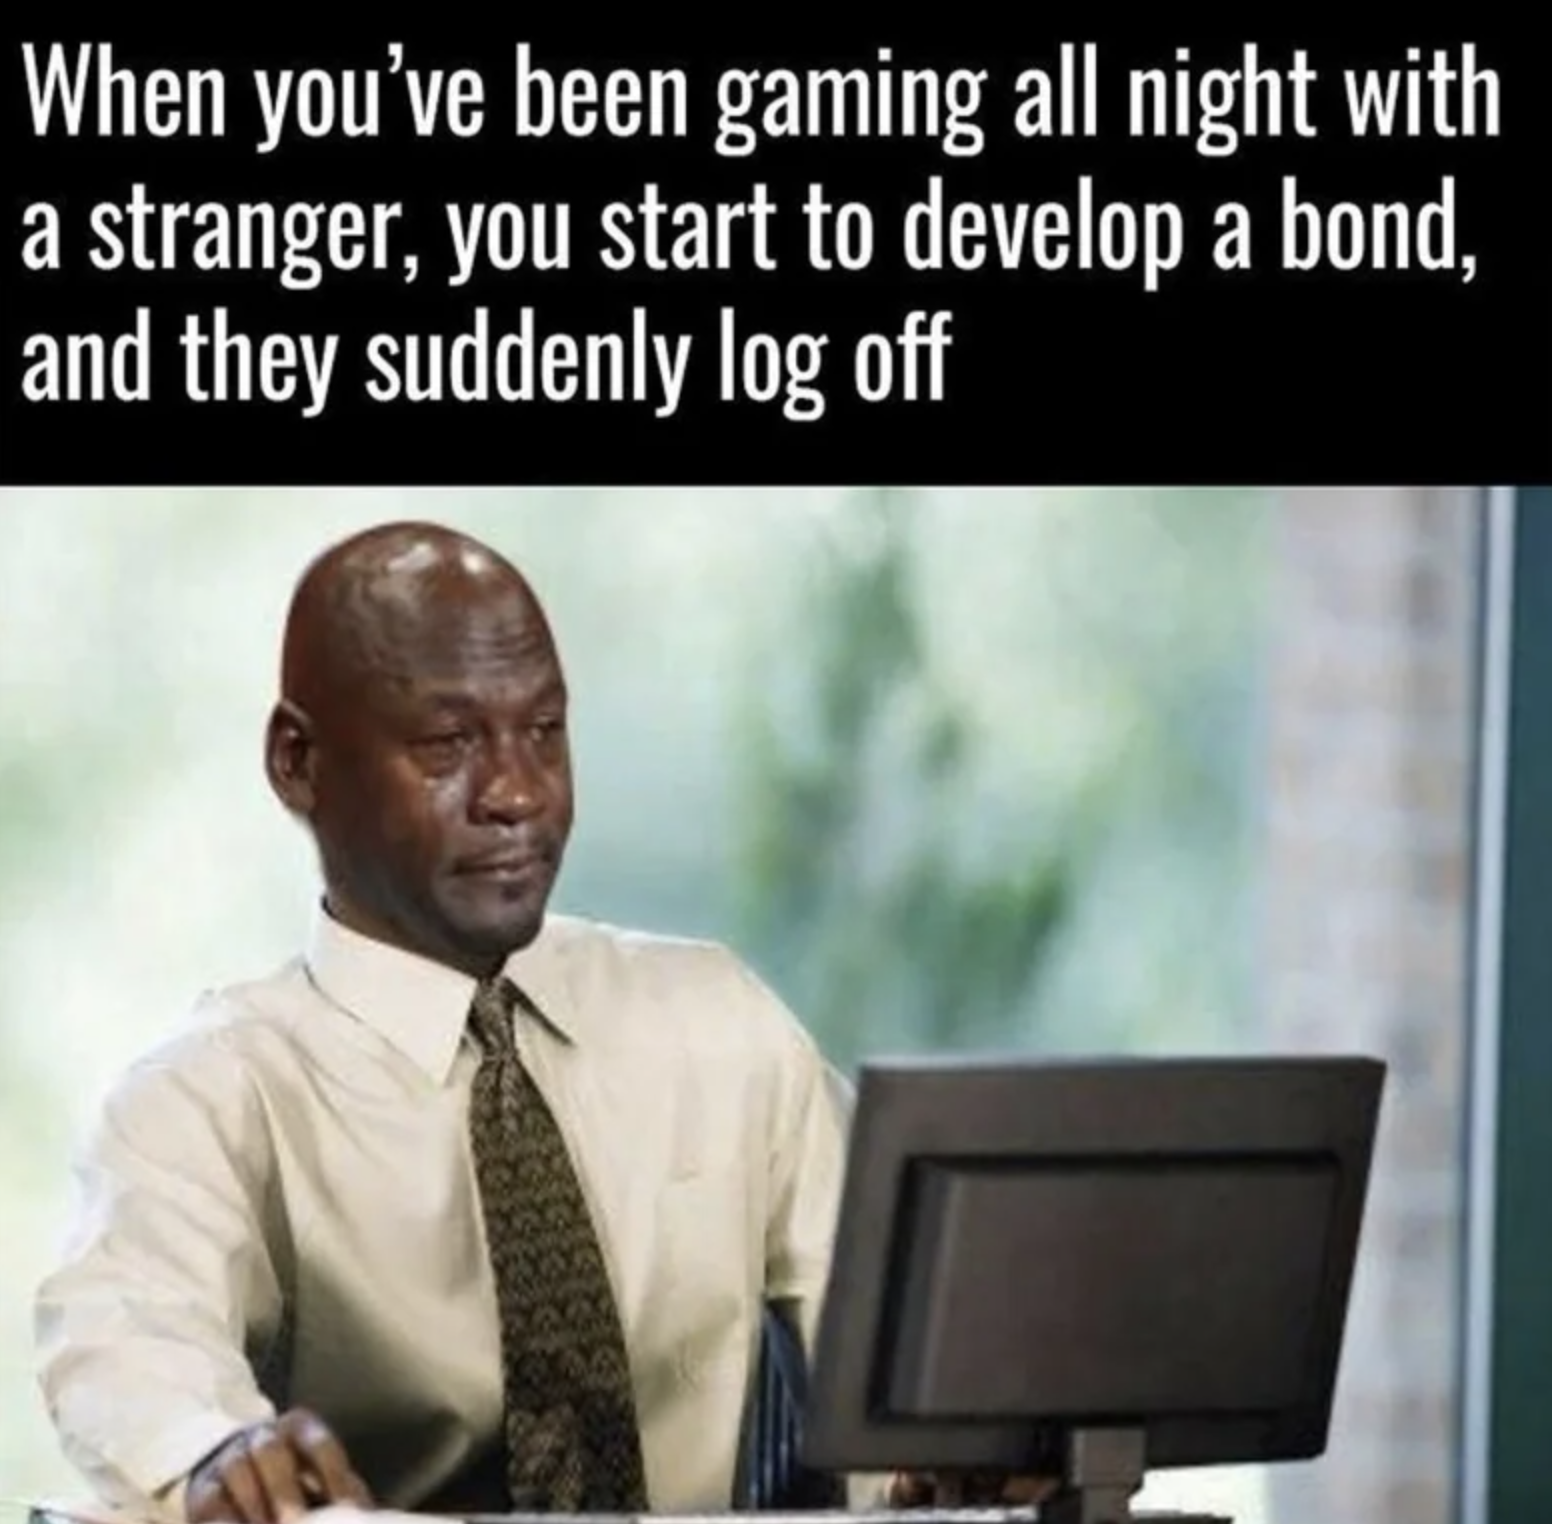 gaming meme - When you've been gaming all night with a stranger, you start to develop a bond, and they suddenly log off